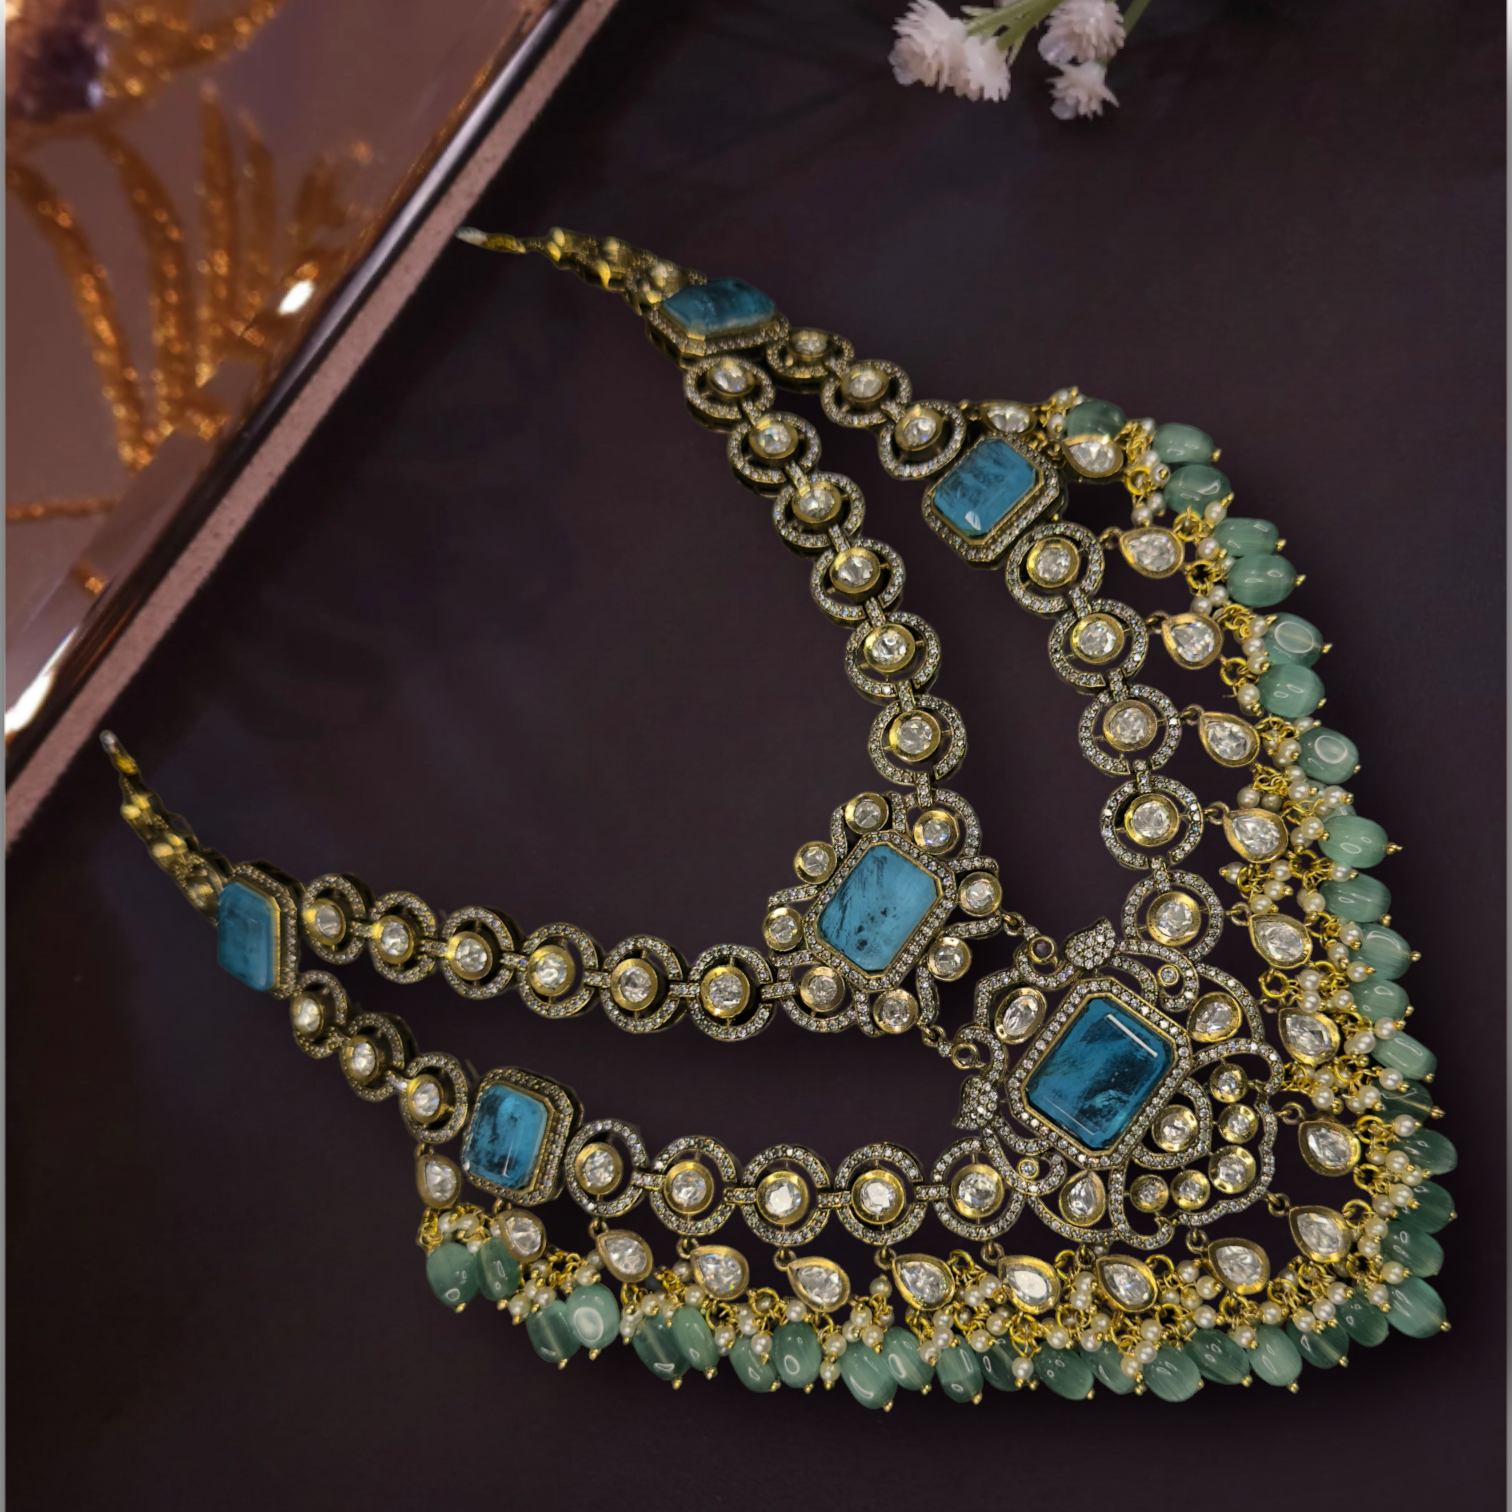 Two-Step Victorian Necklace Set with Aqua Blue Square-Cut Stones, zircon, moissanite polki stones, pearls, and beads, including matching earrings. This Victorian Jewellery is available in a Aqua-blue colour variant. 